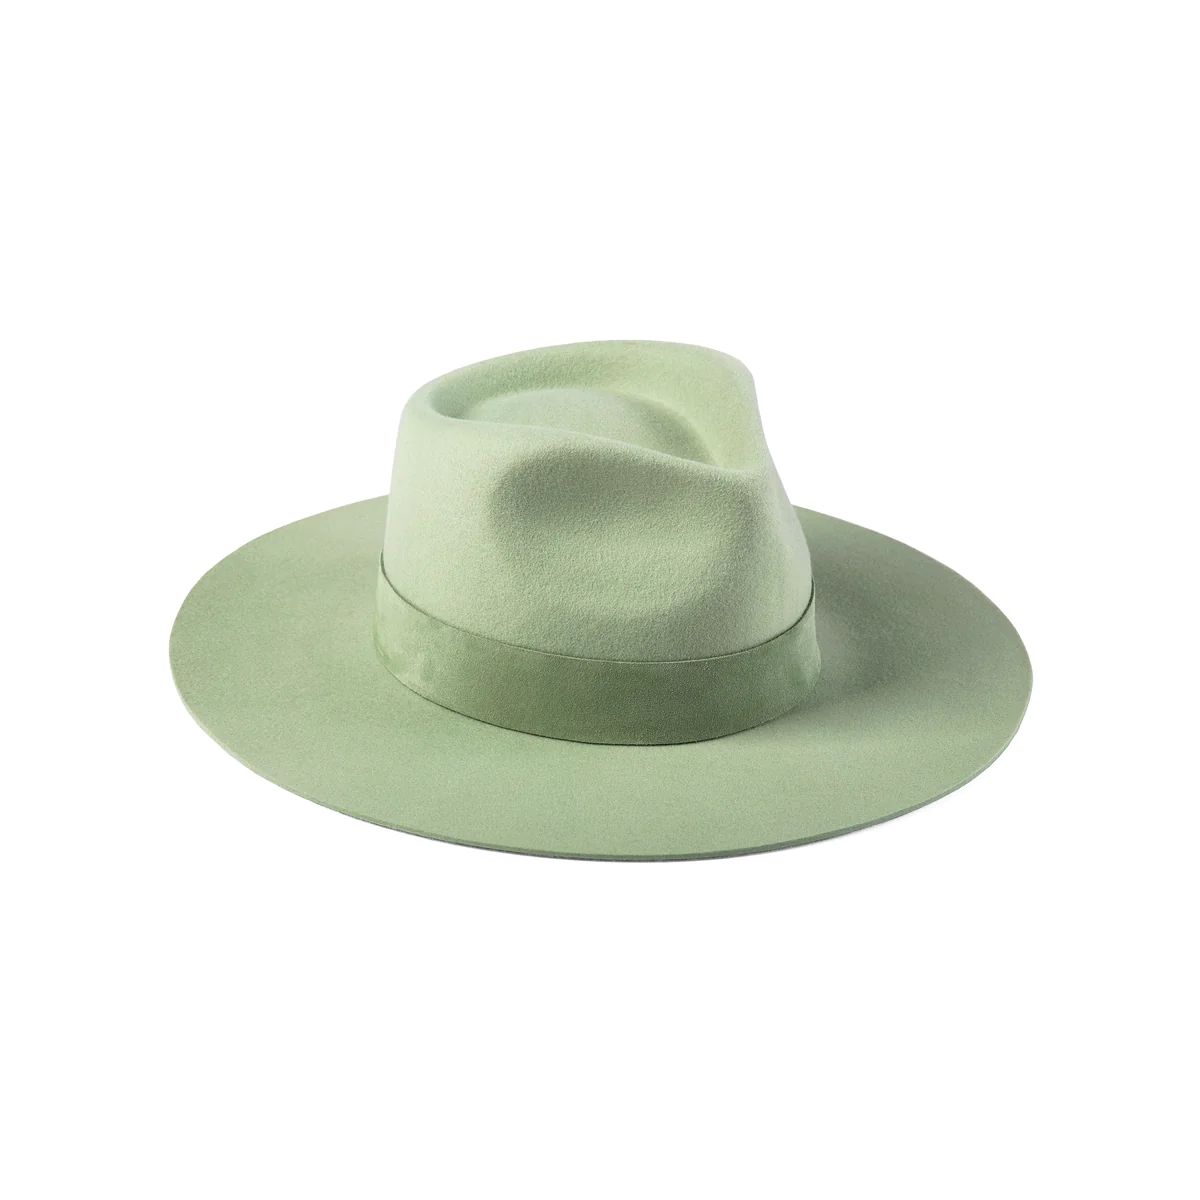 The Mirage - Wool Felt Fedora Hat in Green | Lack of Color US | Lack of Color